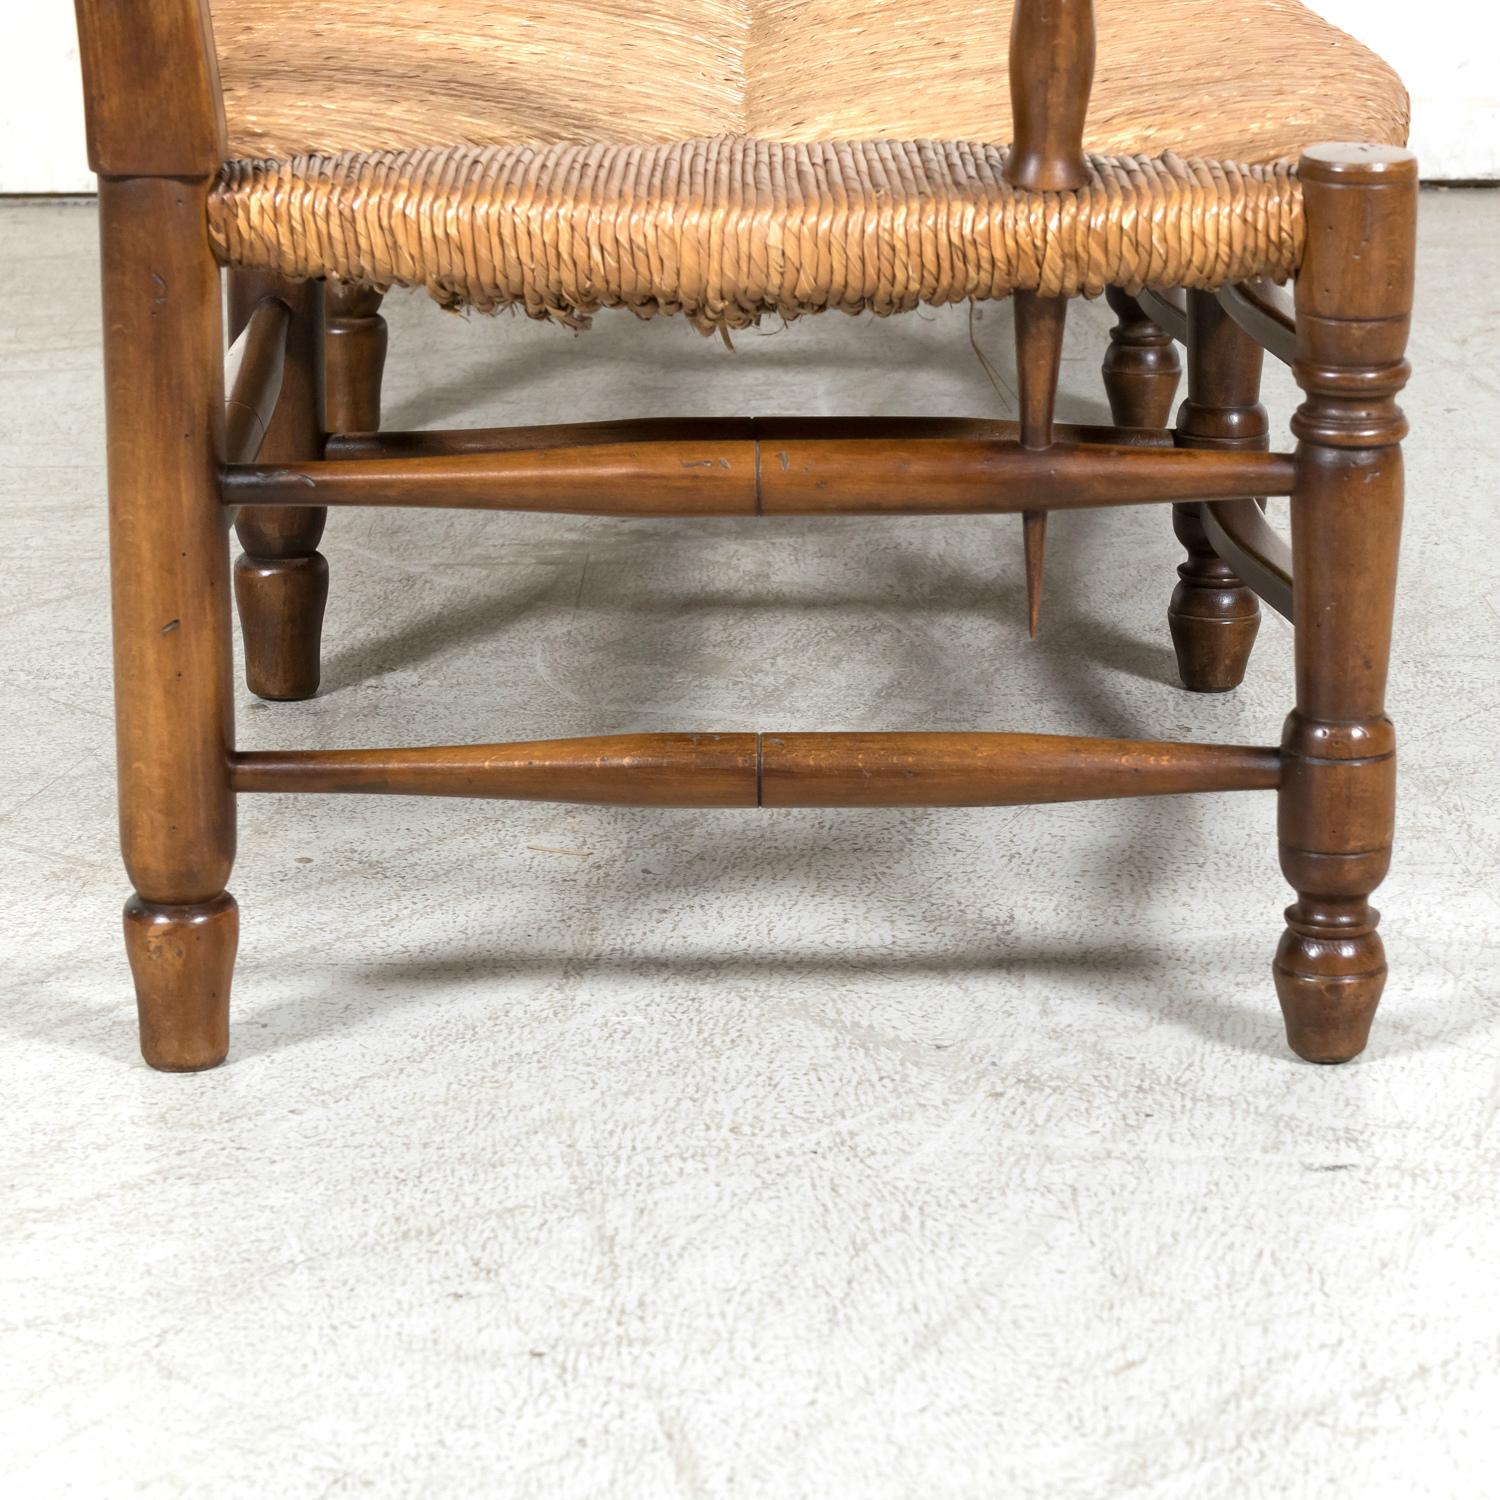 Antique Country French Walnut Ladder Back Settee or Radassier with Rush Seat For Sale 13